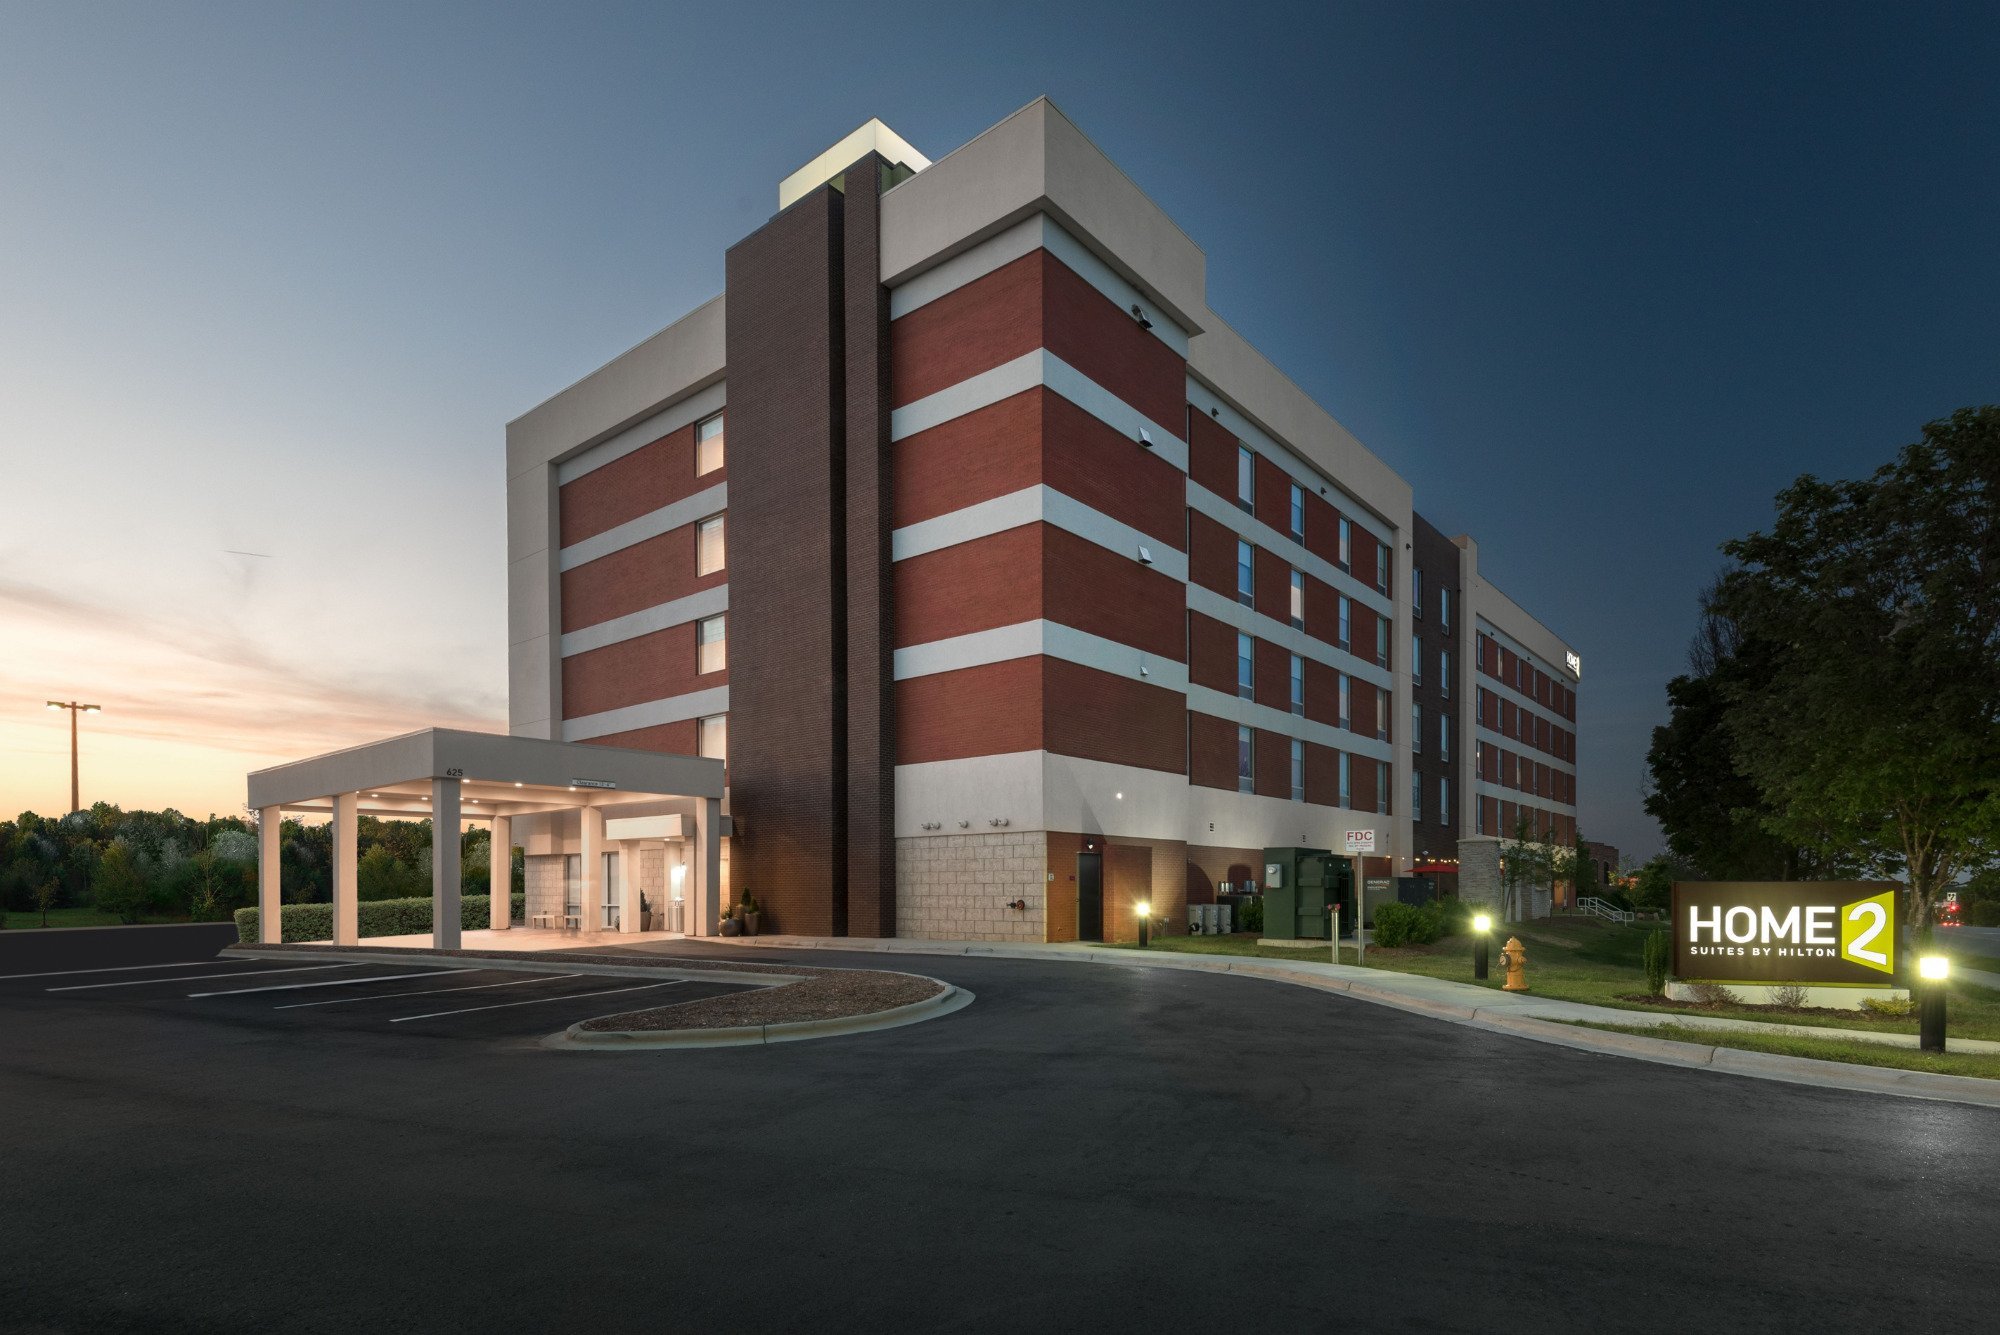 Photo of Home2 Suites by Hilton Charlotte University Research Park, Charlotte, NC